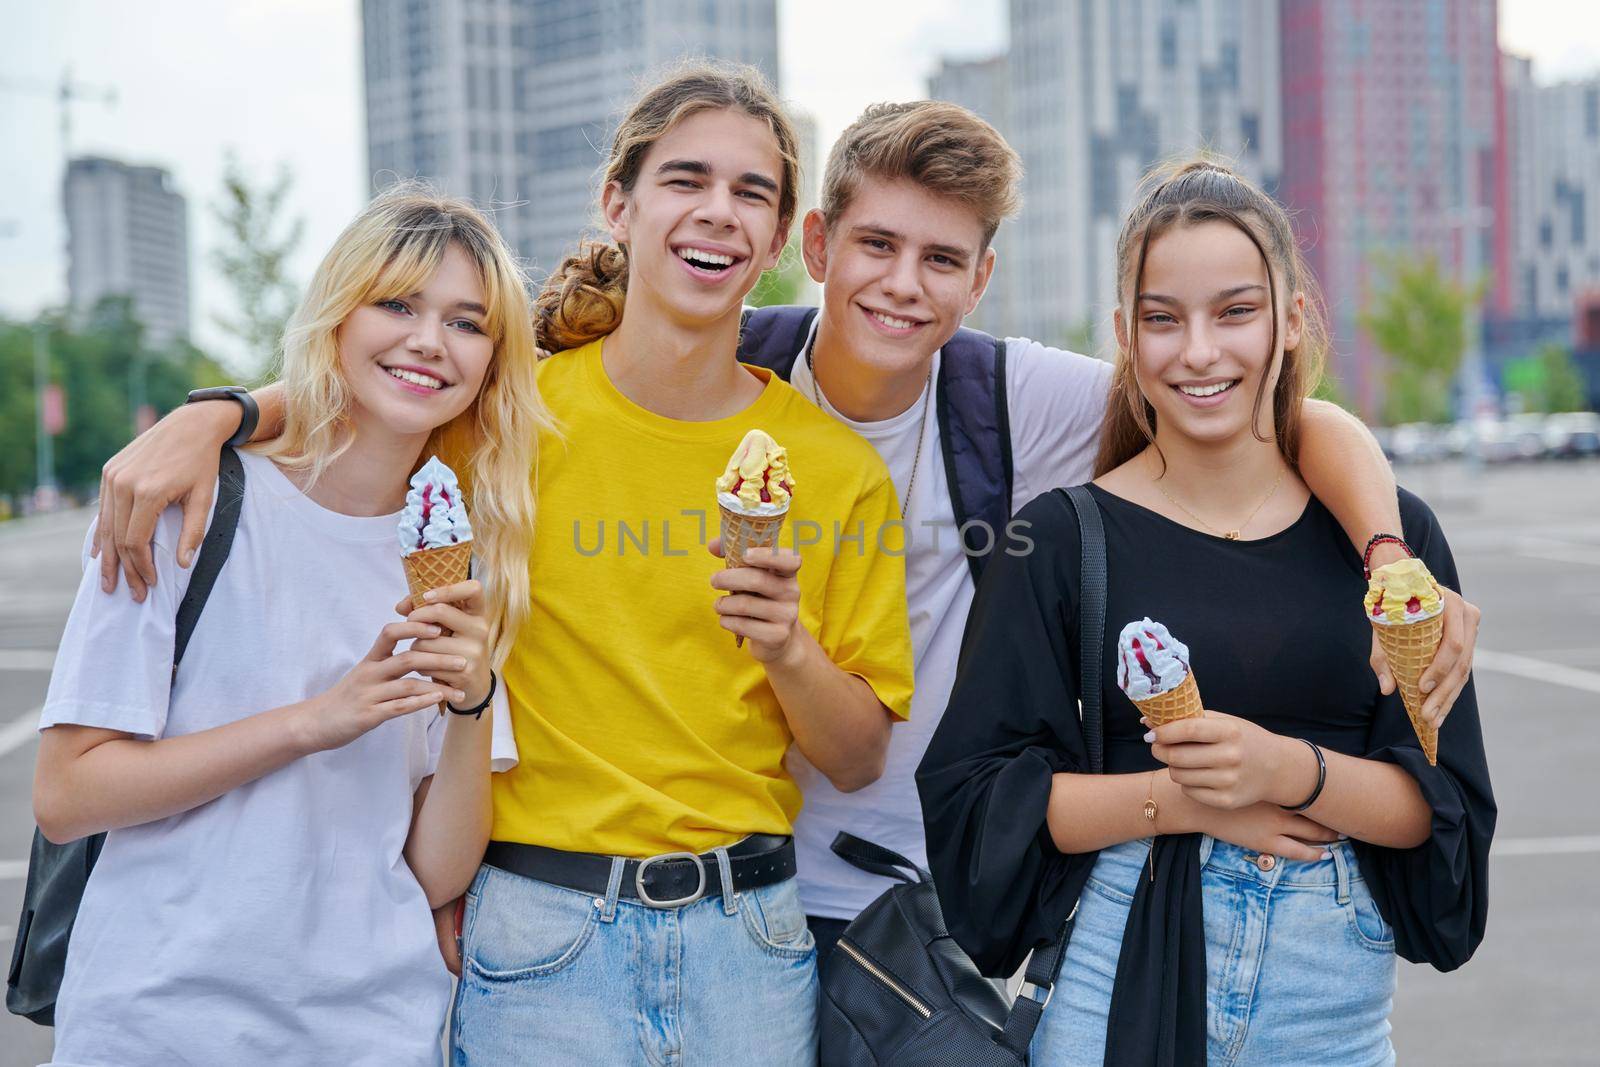 Group portrait of happy teenagers having fun with ice cream. Four smiling young people embracing together in city, lifestyle, friendship, adolescence, summer, leisure, youth concept